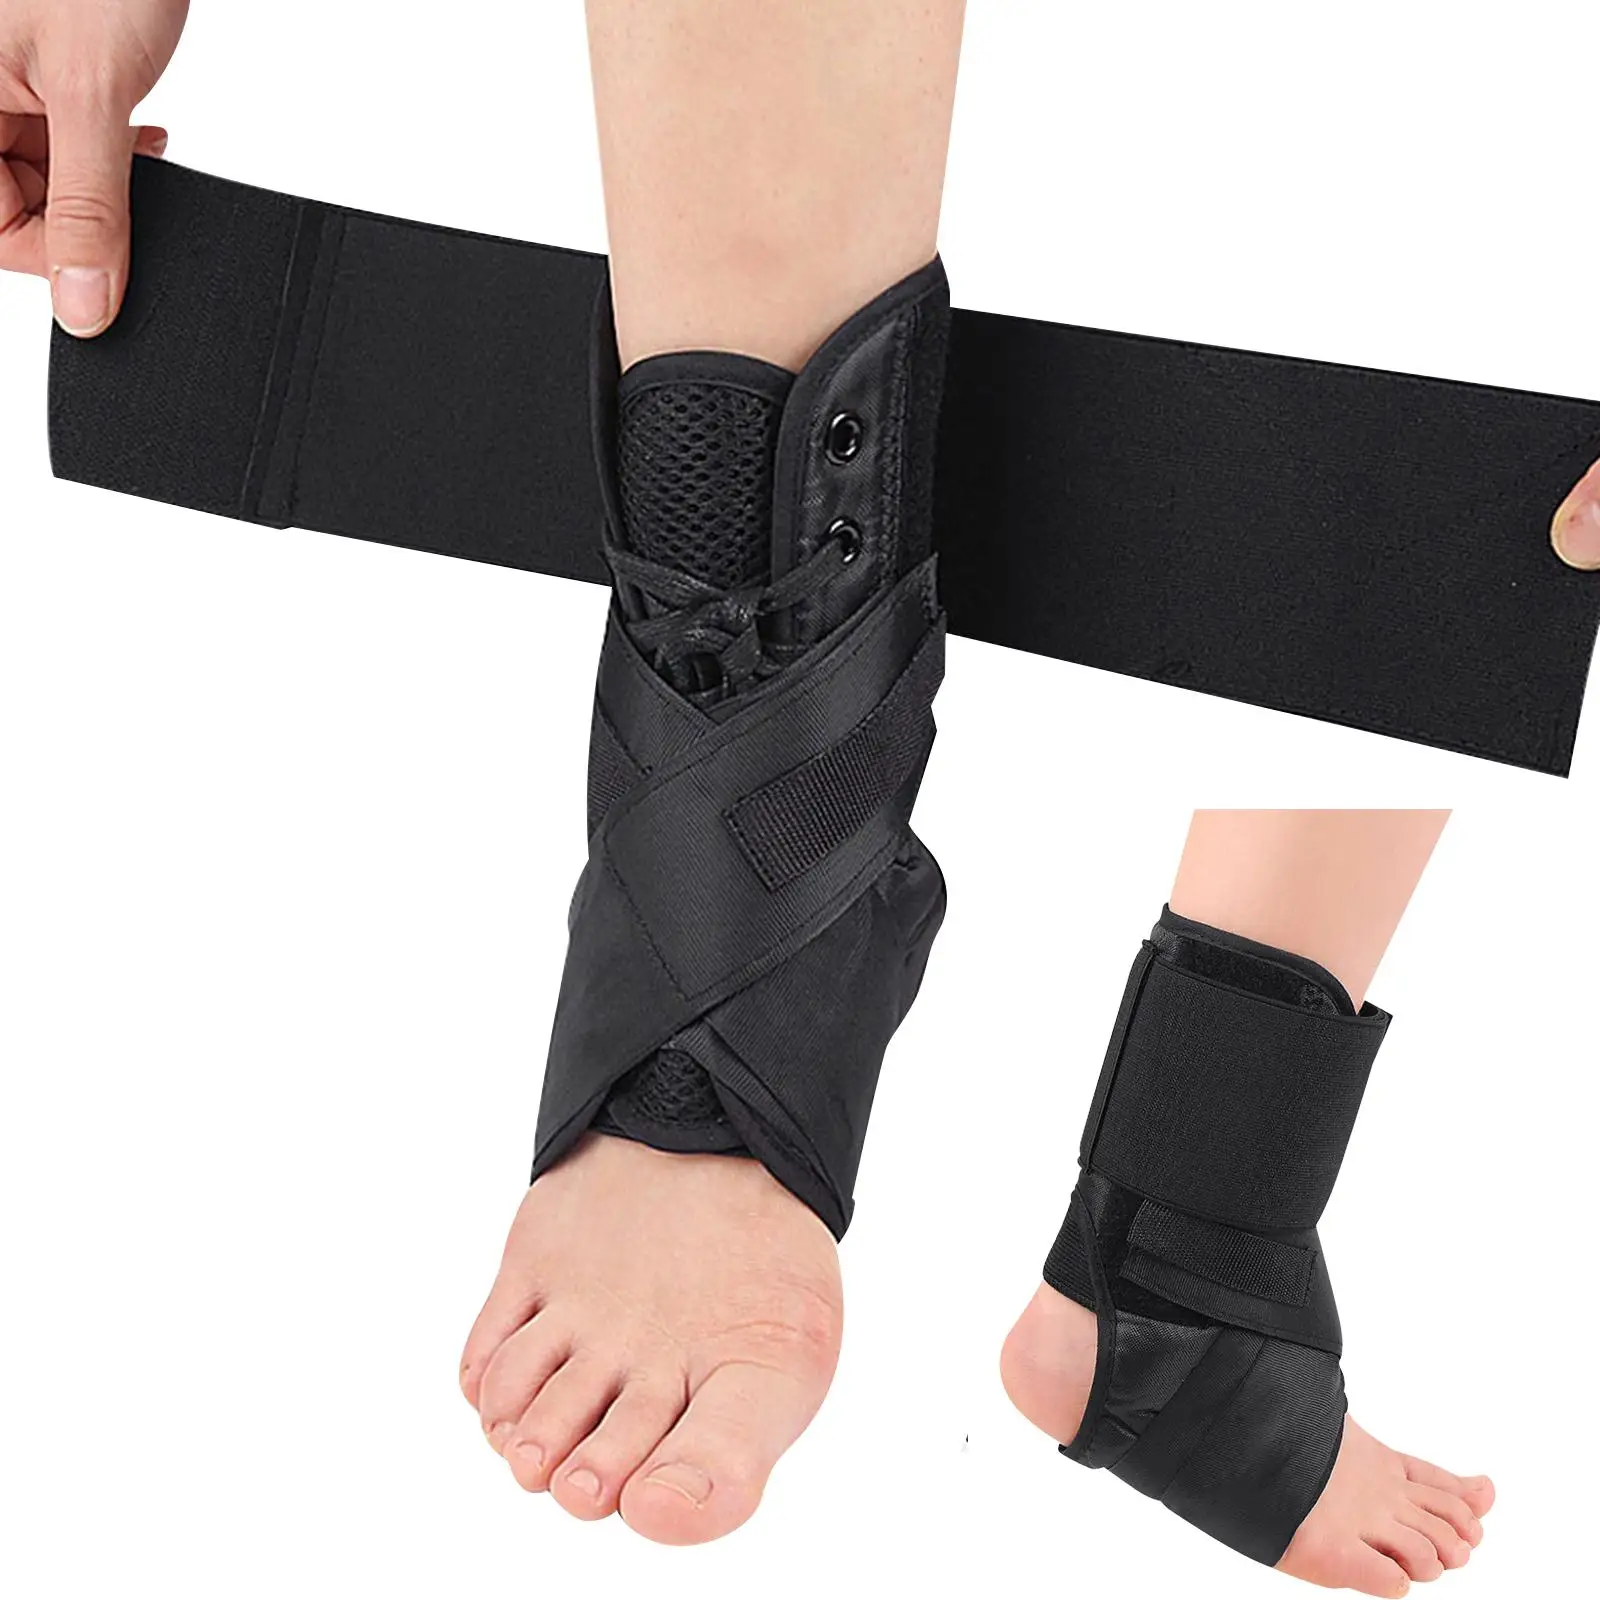 Ankle Brace Breathable Protection Wrap for Volleyball Tennis Ankle Guard